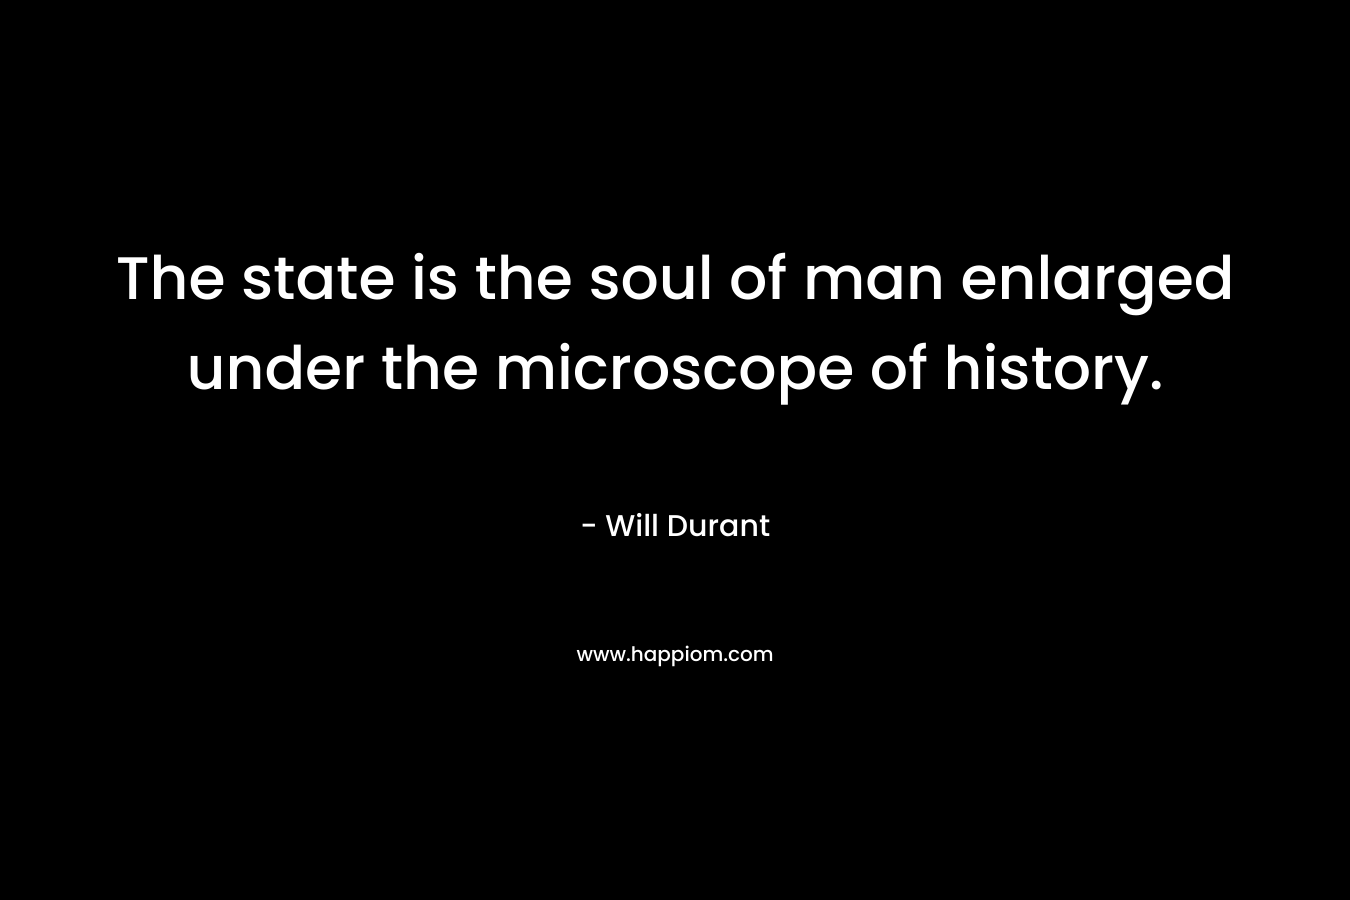 The state is the soul of man enlarged under the microscope of history.